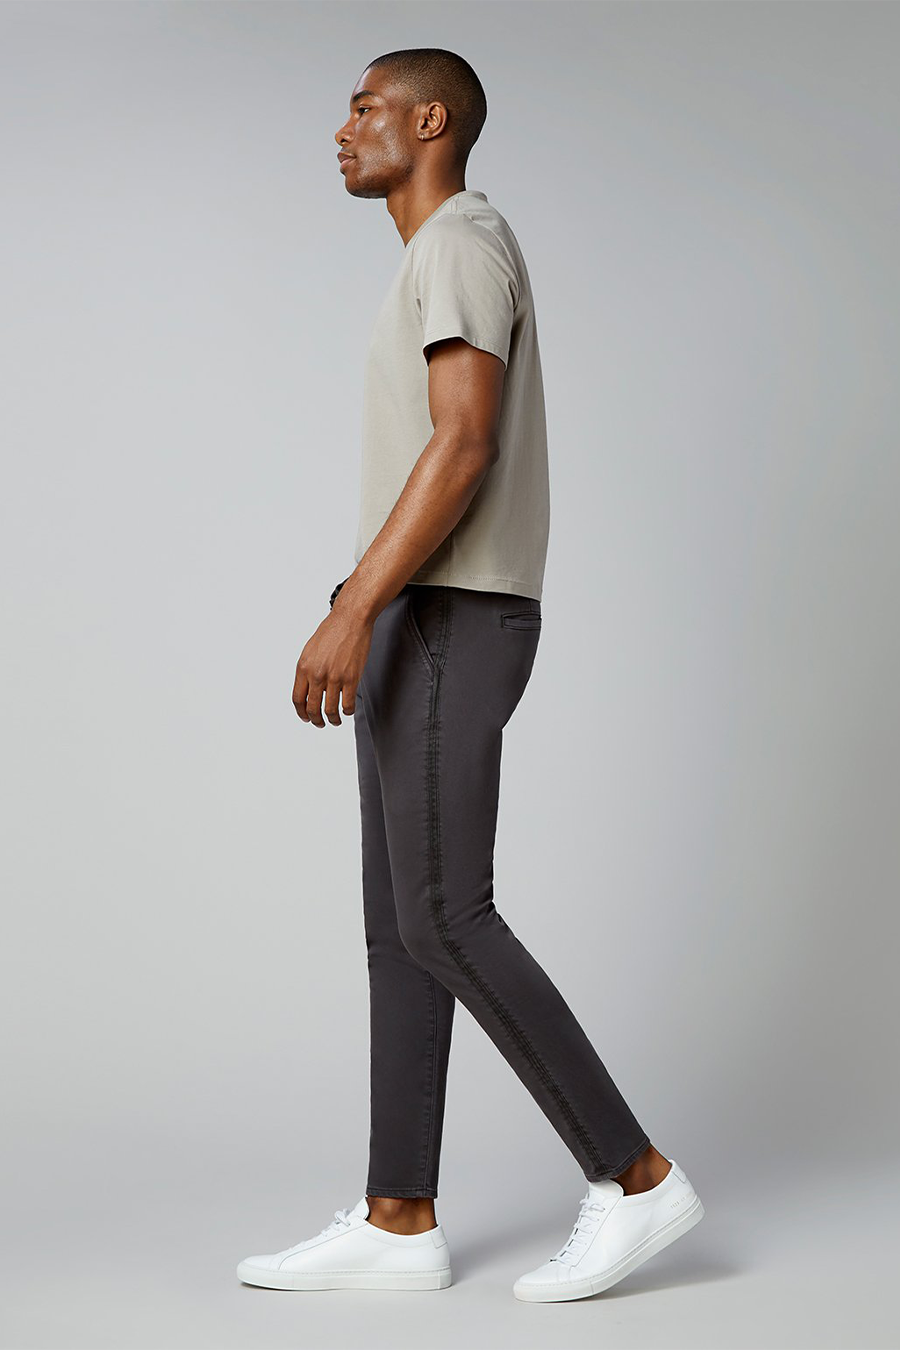 Jay Knit Track Chino | Dewey Stripe - Main Image Number 2 of 4